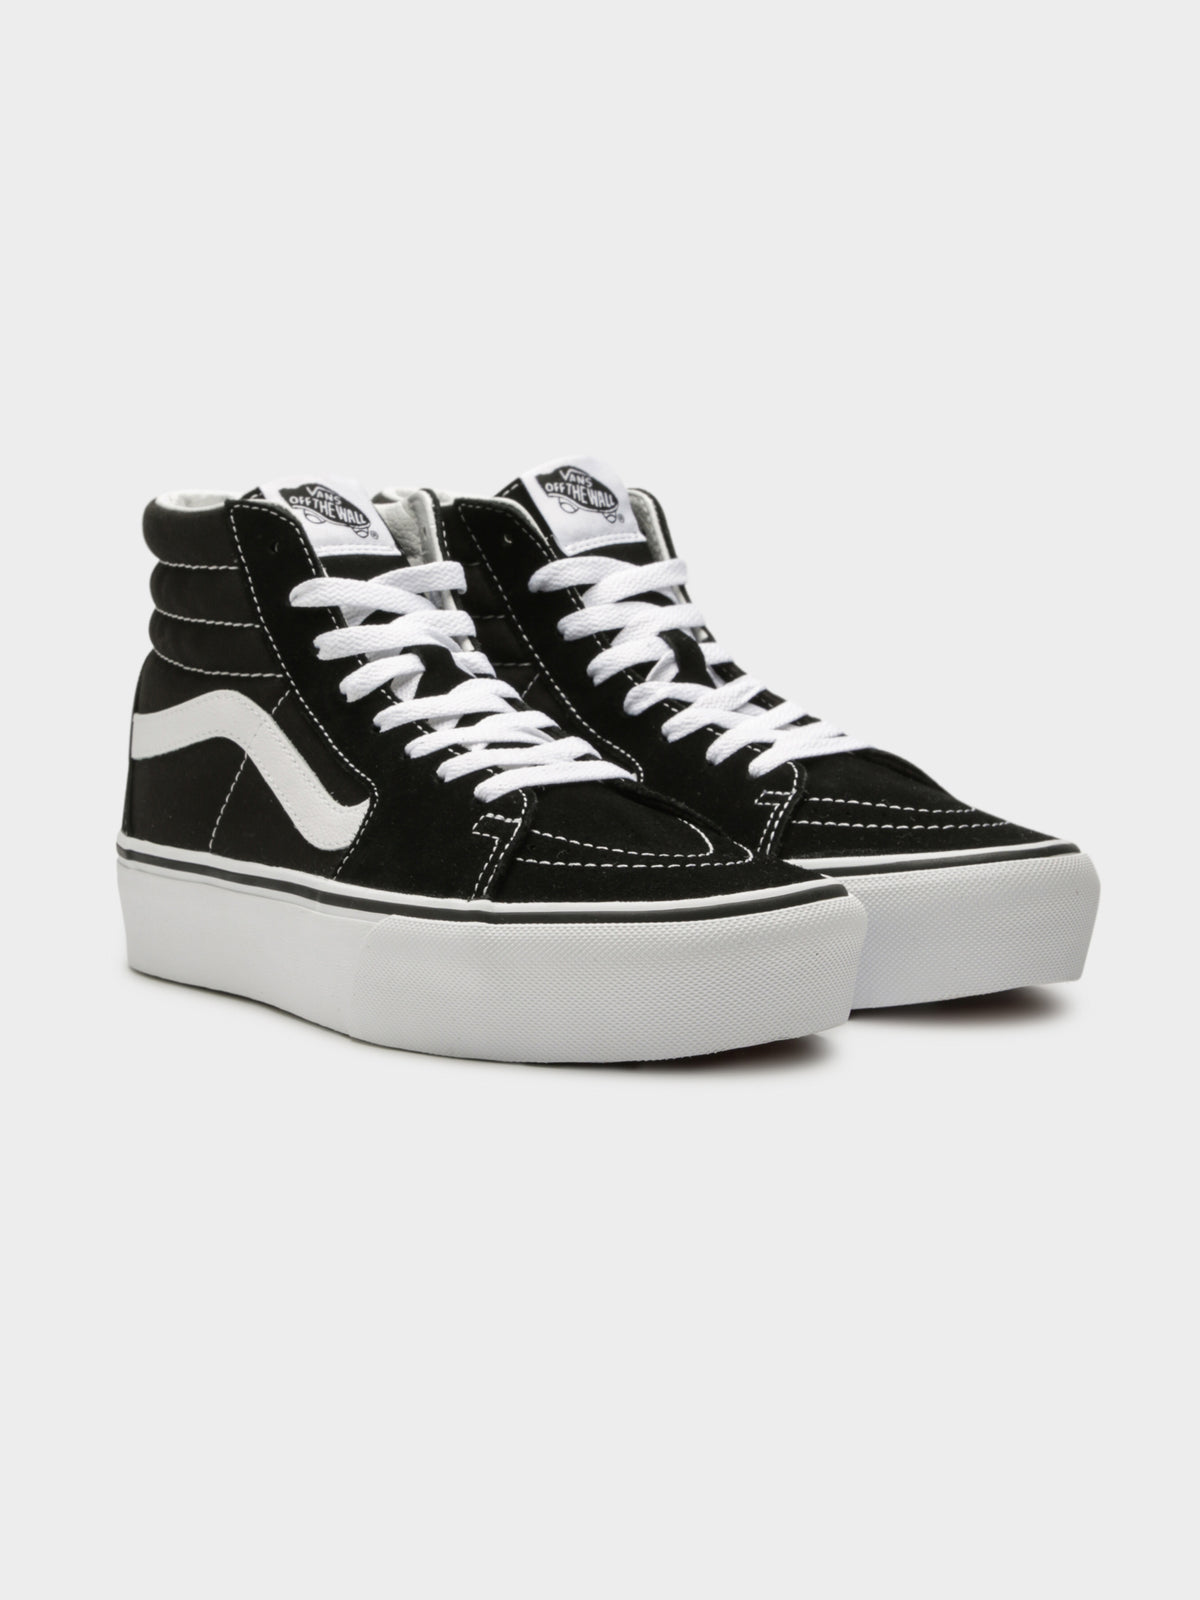 Unisex SK8 Hi-Rise Platform Sneakers in Black and White